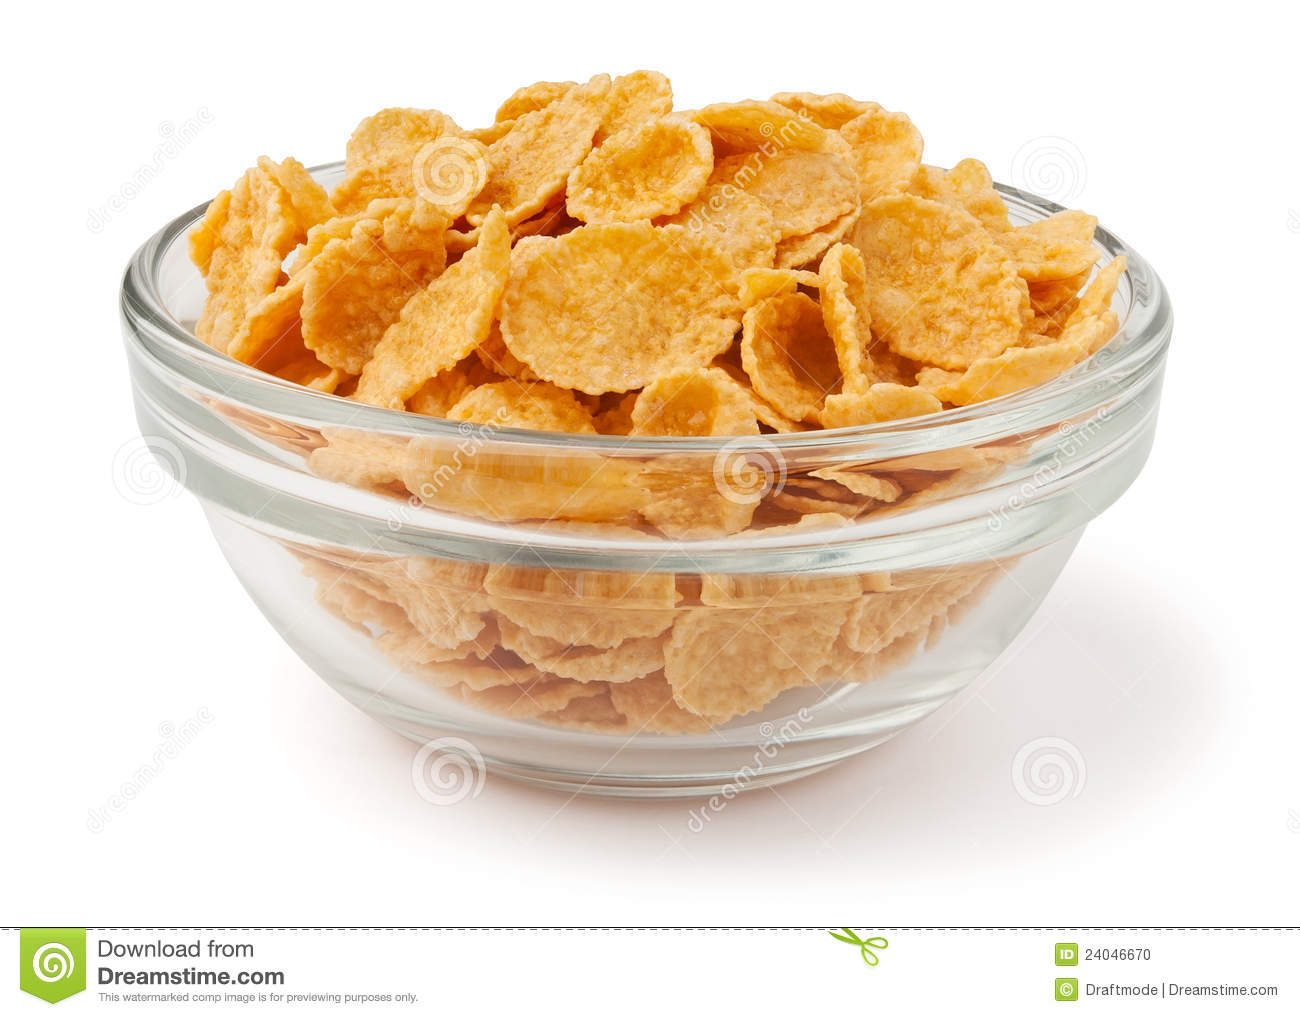 Corn Flakes In A Bowl Stock Photo   Image  24046670